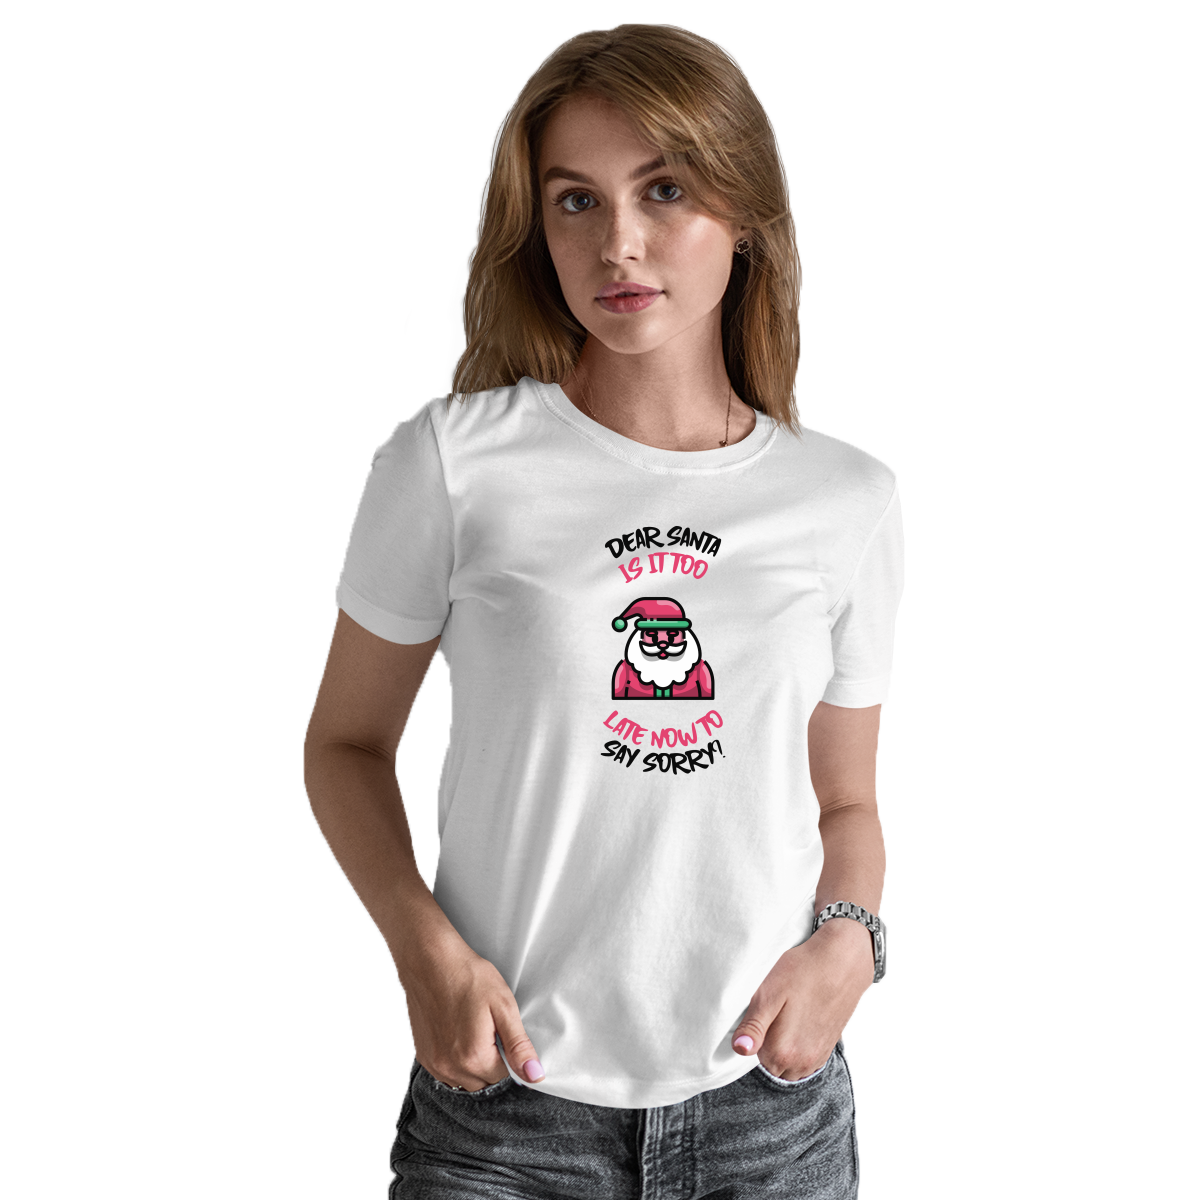 Dear Santa, Is It Too Late to Say Sorry? Women's T-shirt | White